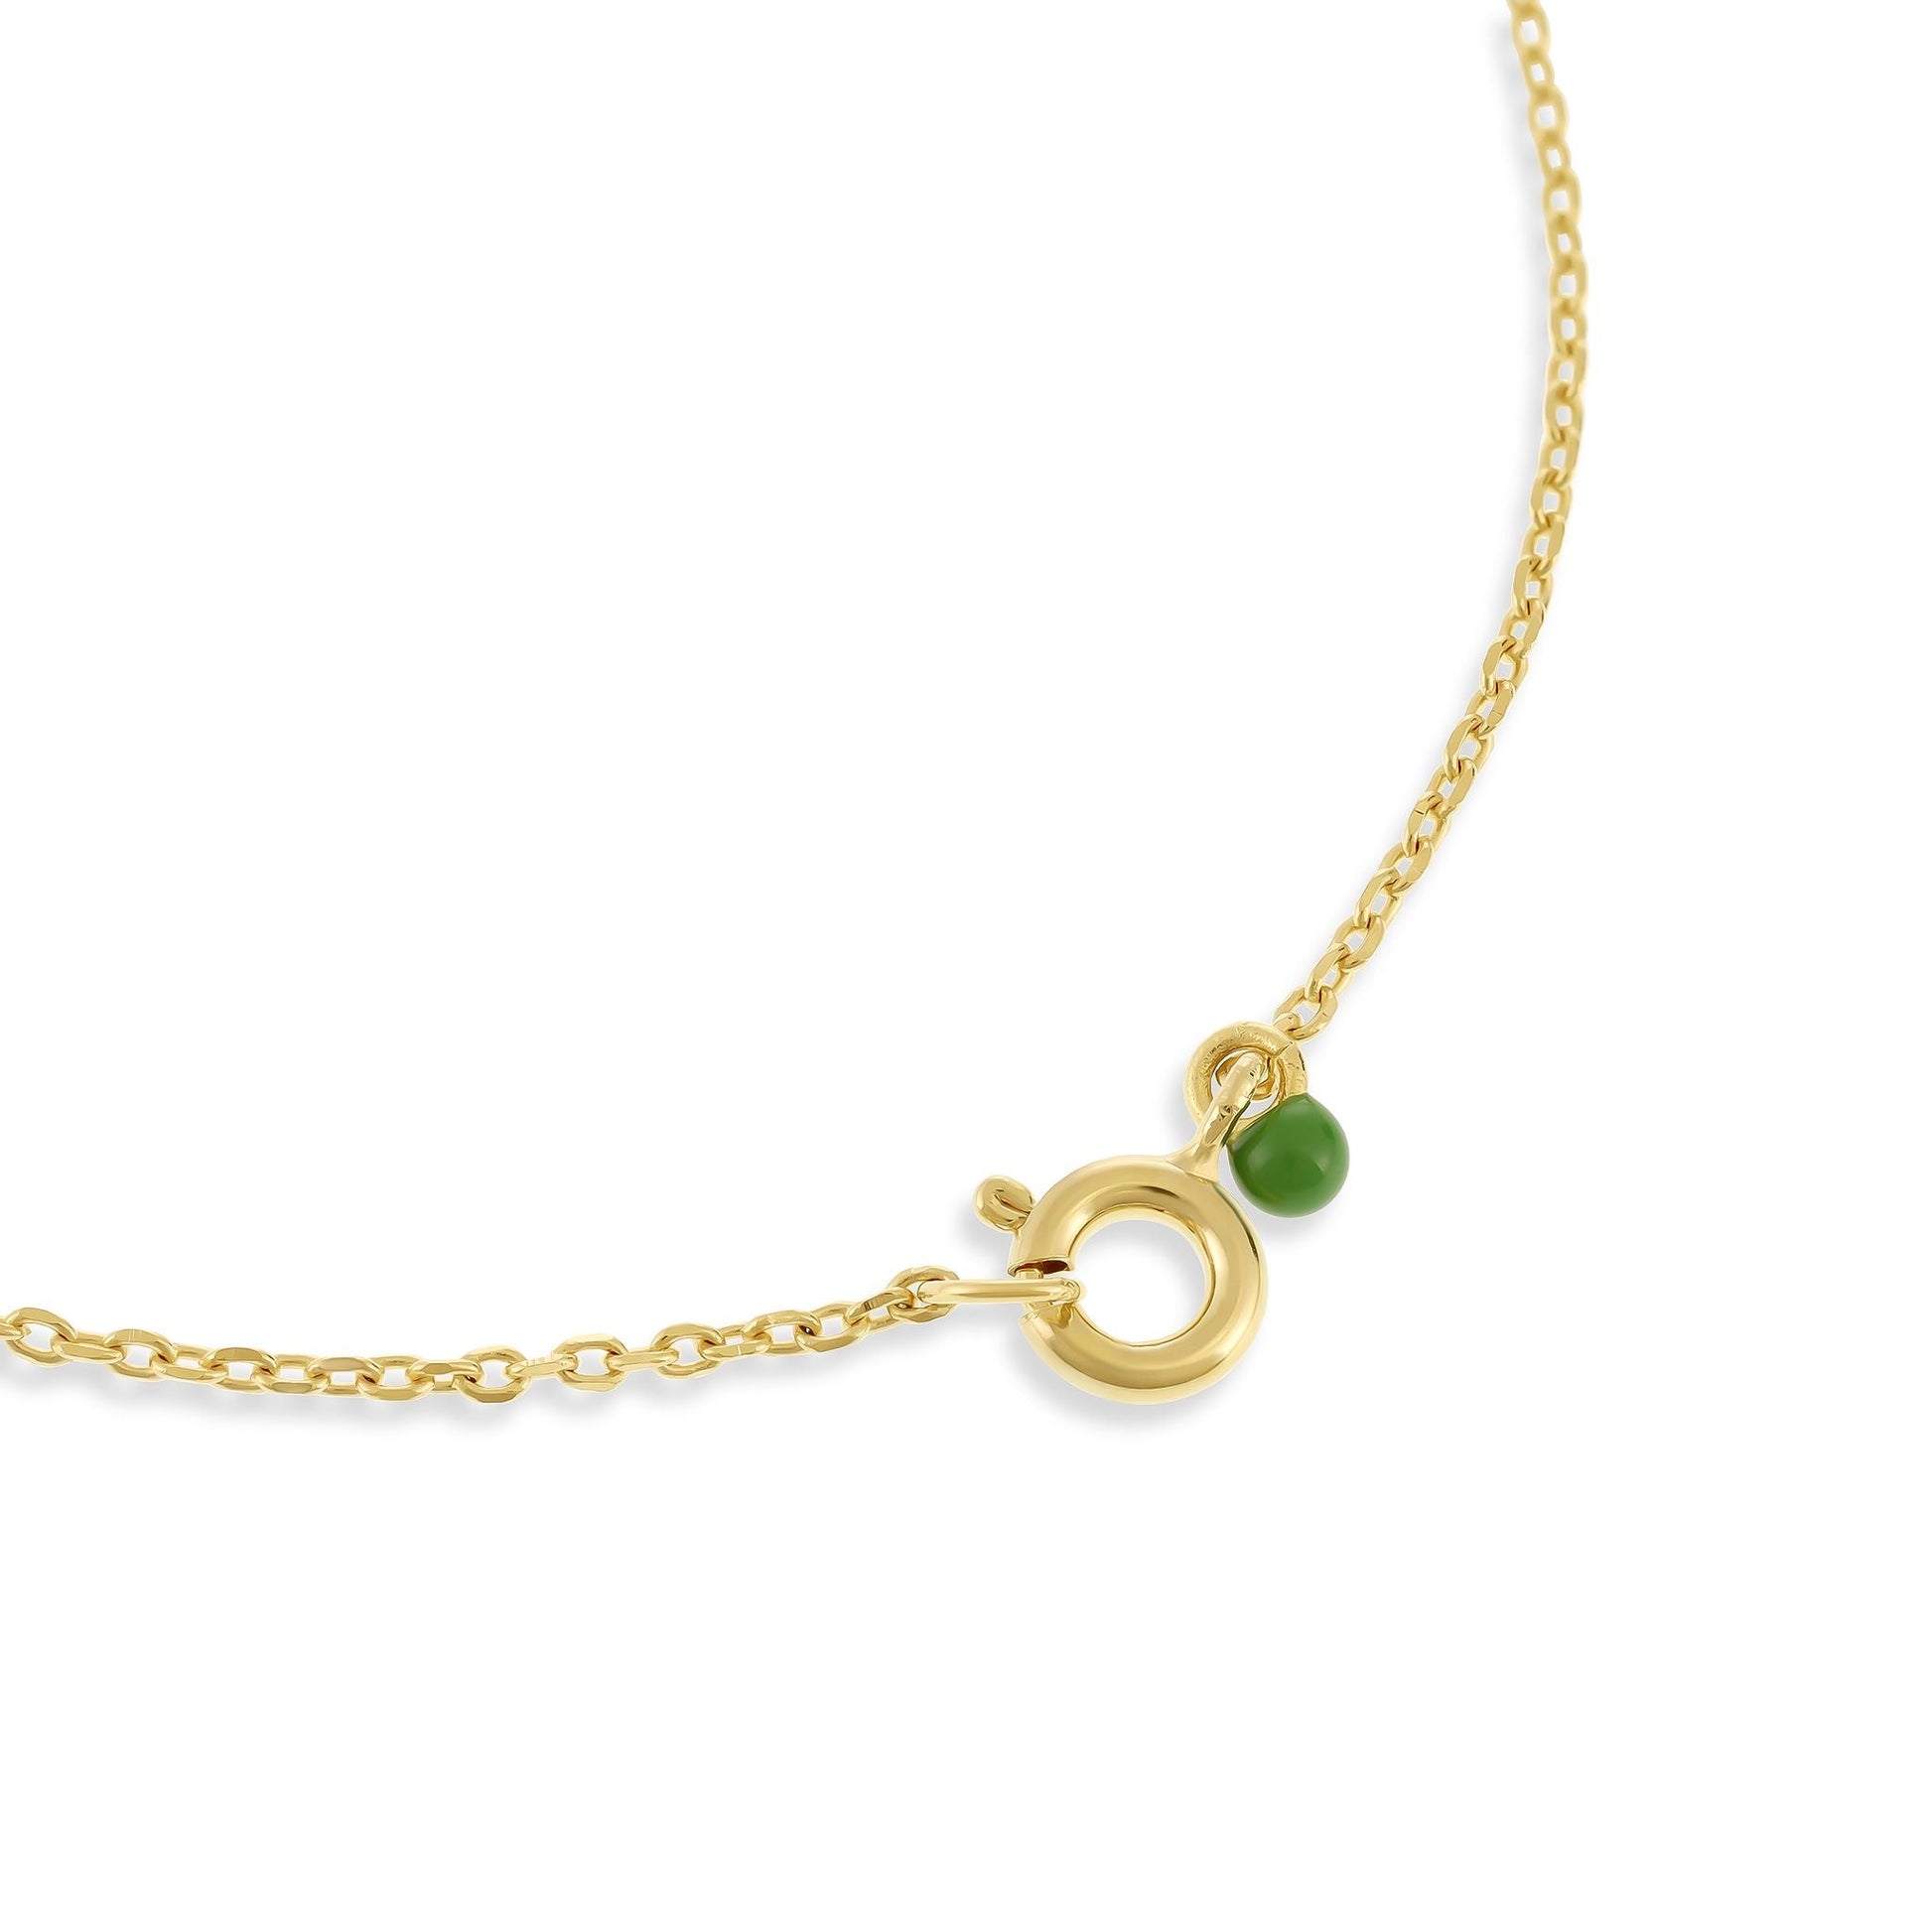 18ct 1 Micron gold plated necklace with Green enamel twist PNK3001G - FJewellery